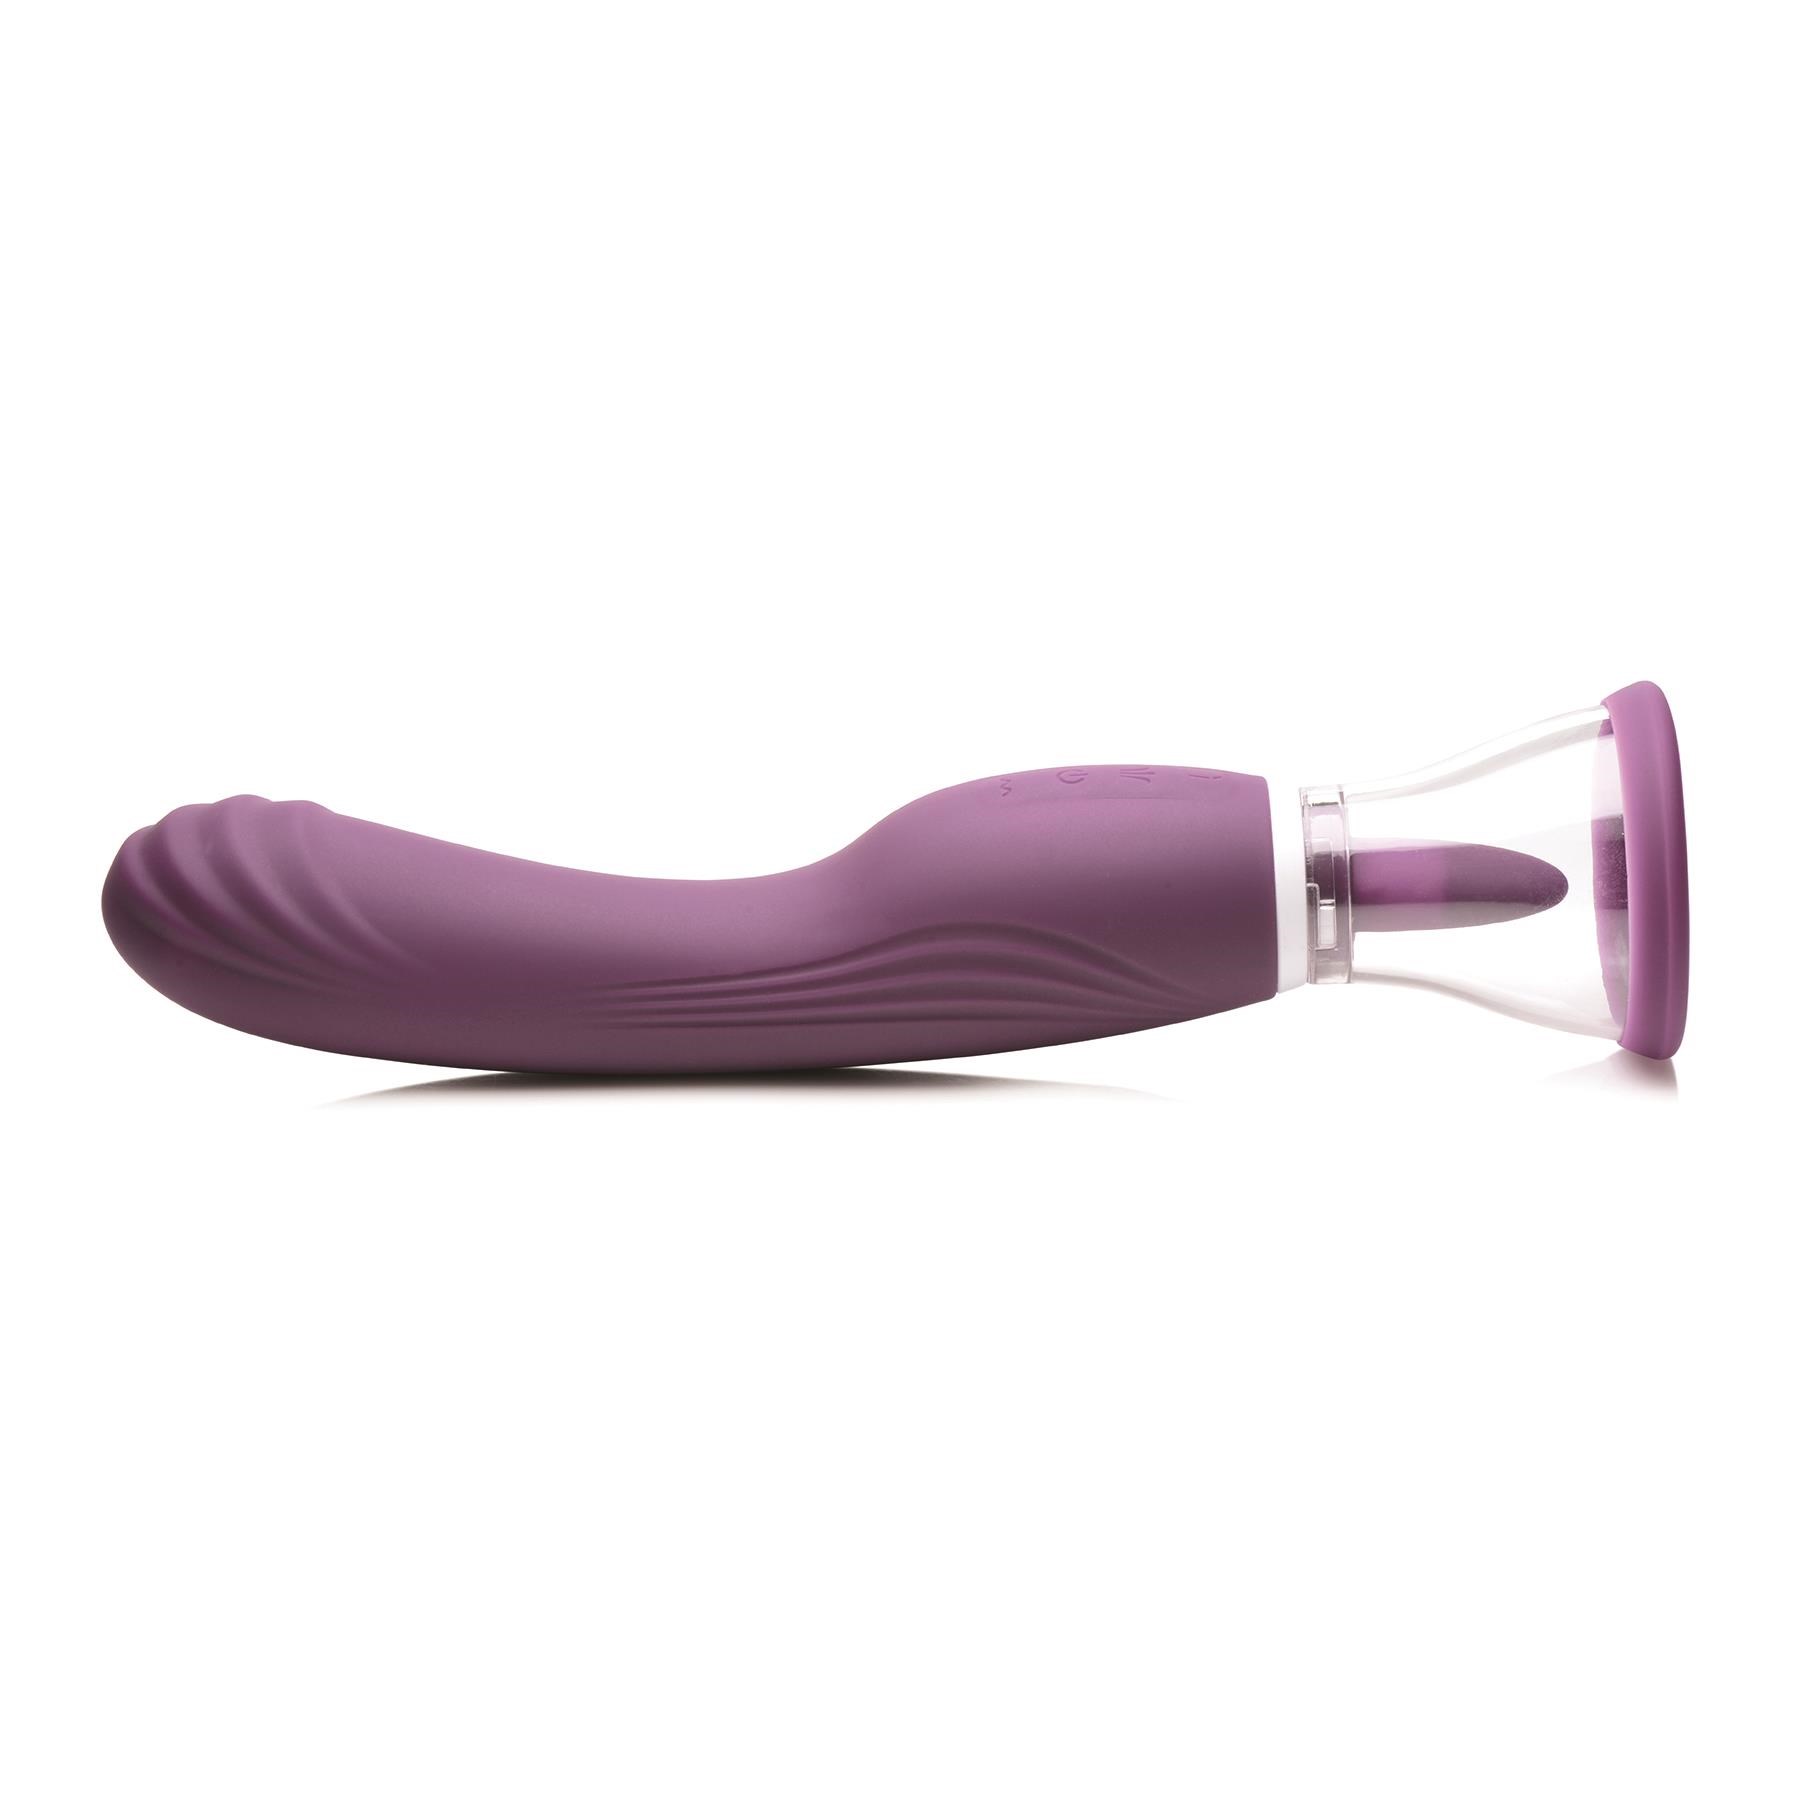 Shegasm Lickgasm Vibrating Pussy Pump - Side Shot with Small Cup